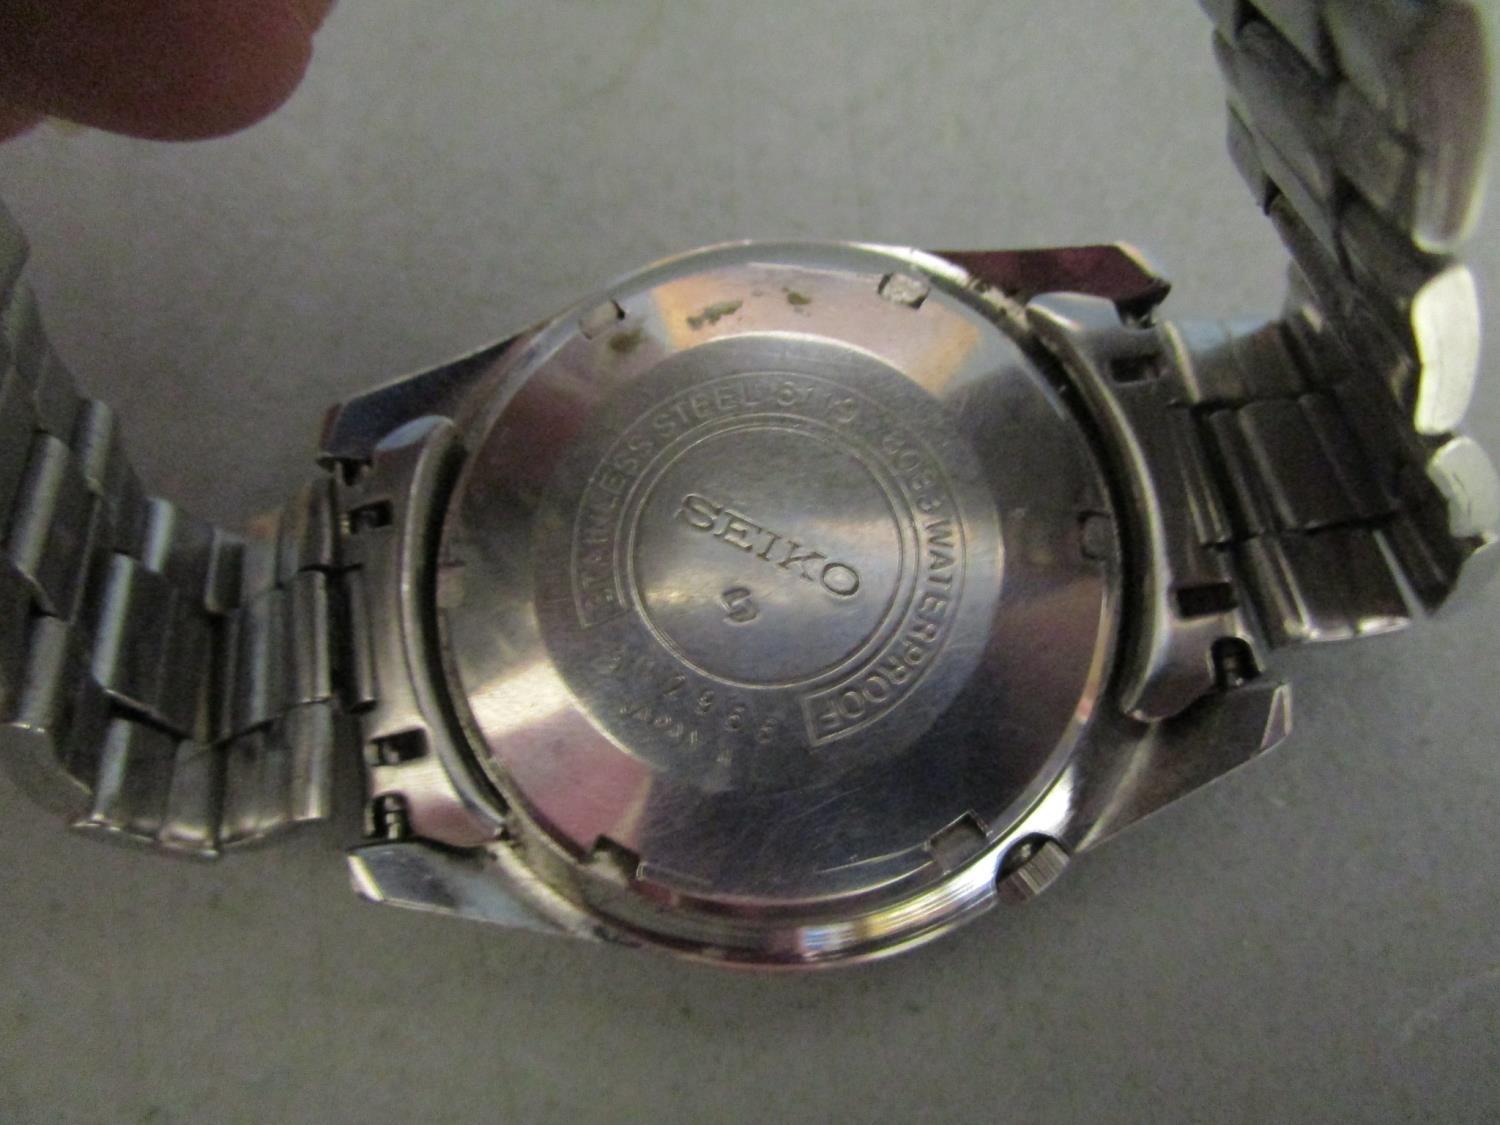 Seiko 5 automatic 21 jewel gents wristwatch with luminous bat markers and hands, date aperture at 3, - Image 2 of 2